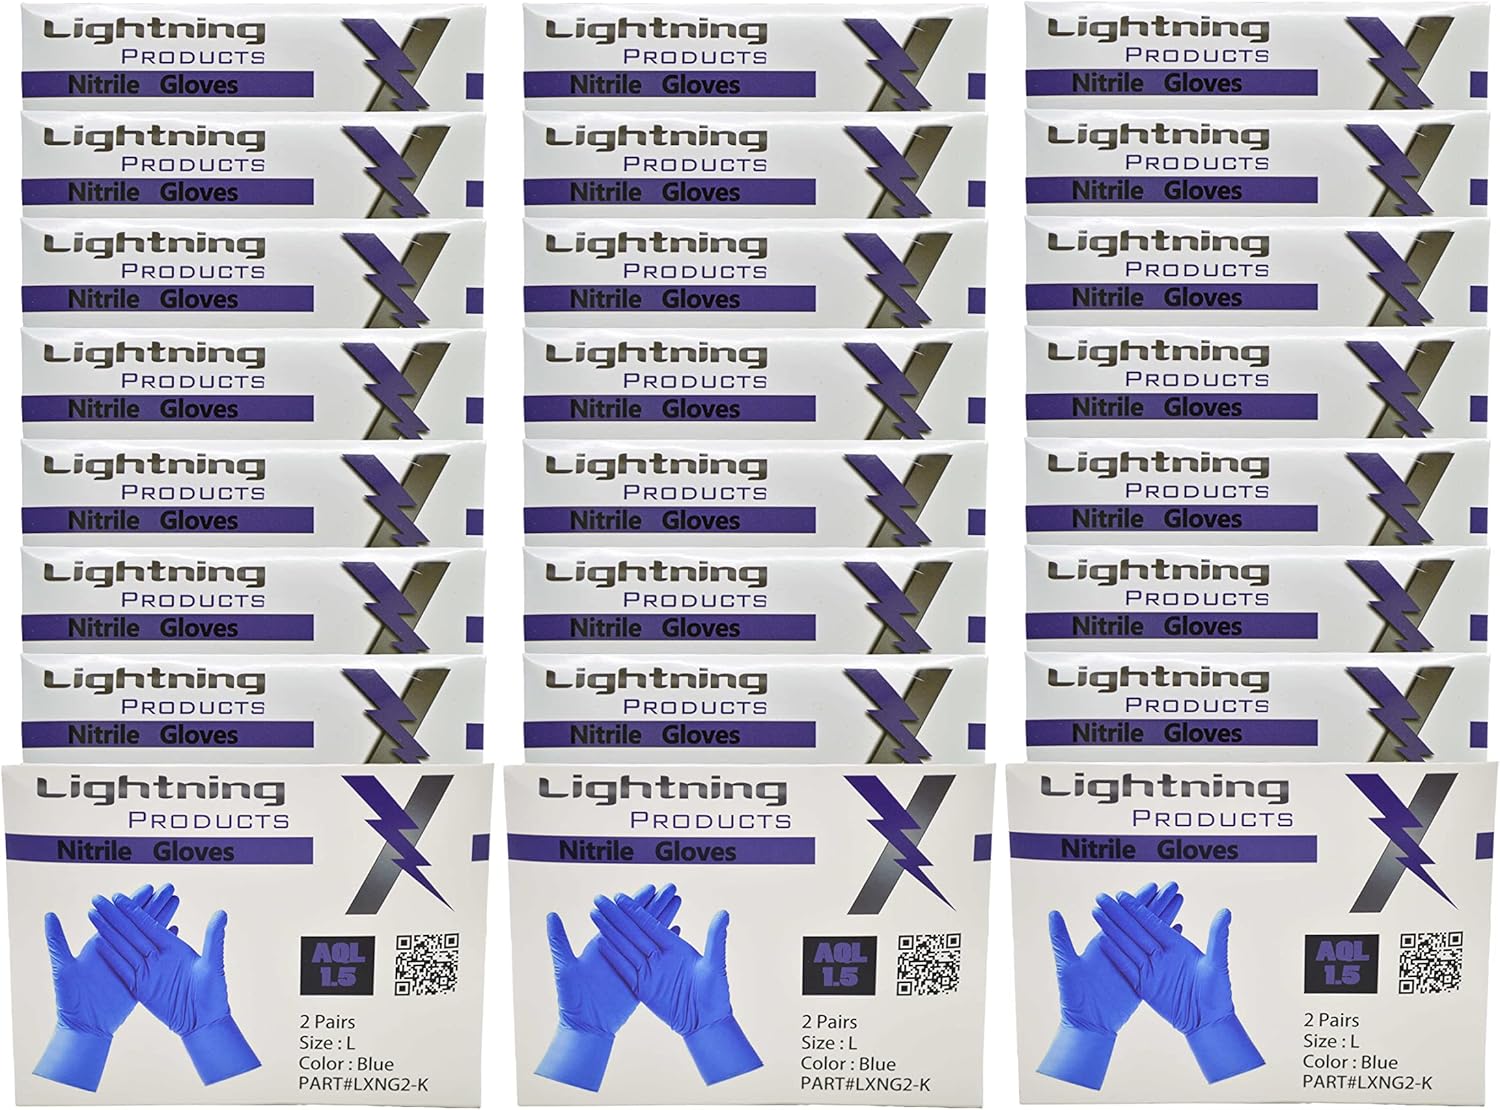 Lightning X Blue Nitrile Glove Pairs, Individually Packed, 100 Gloves, 50 Pairs, 25 Carded Packs of 2 Pairs - Large